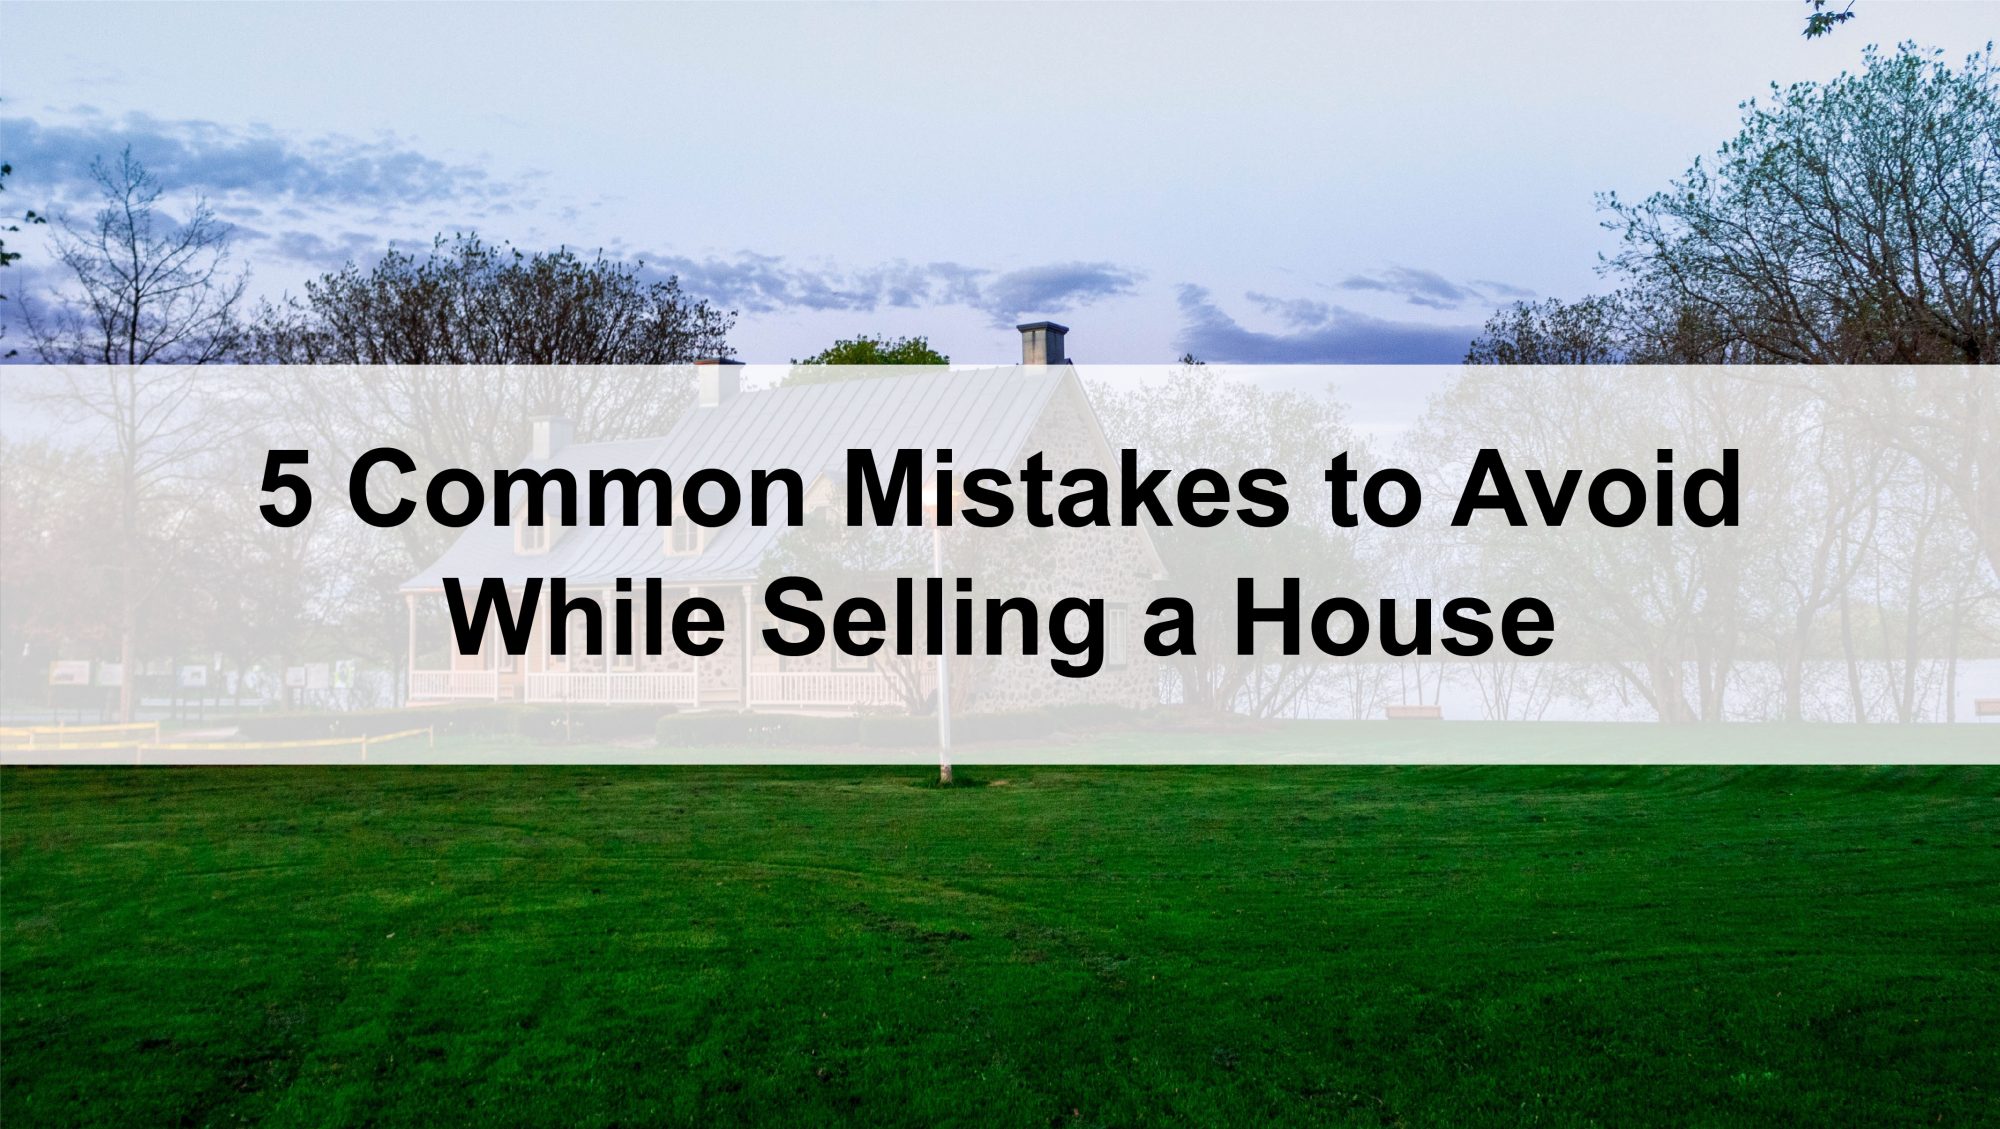 5 Common Mistakes to Avoid While Selling a House